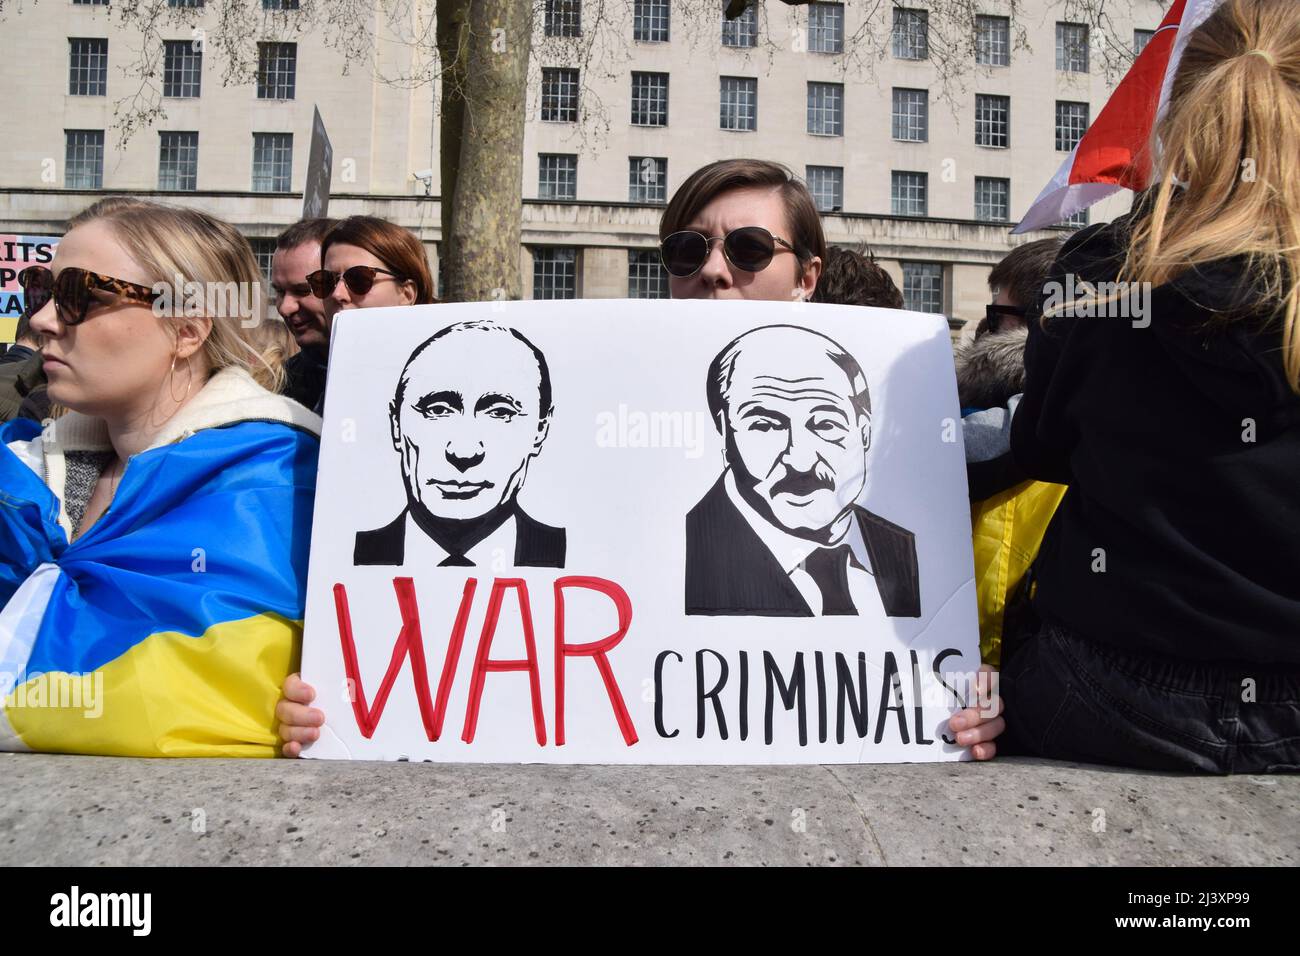 London, UK. 10th April 2022. A protester holds a sign calling Vladimir Putin and President of Belarus Alexander Lukashenko 'war criminals'. Demonstrators gathered outside Downing Street in solidarity with Ukraine, as reports emerge of massacres in Bucha and other towns and cities in Ukraine and atrocities reportedly committed by Russian troops. Credit: Vuk Valcic/Alamy Live News Stock Photo